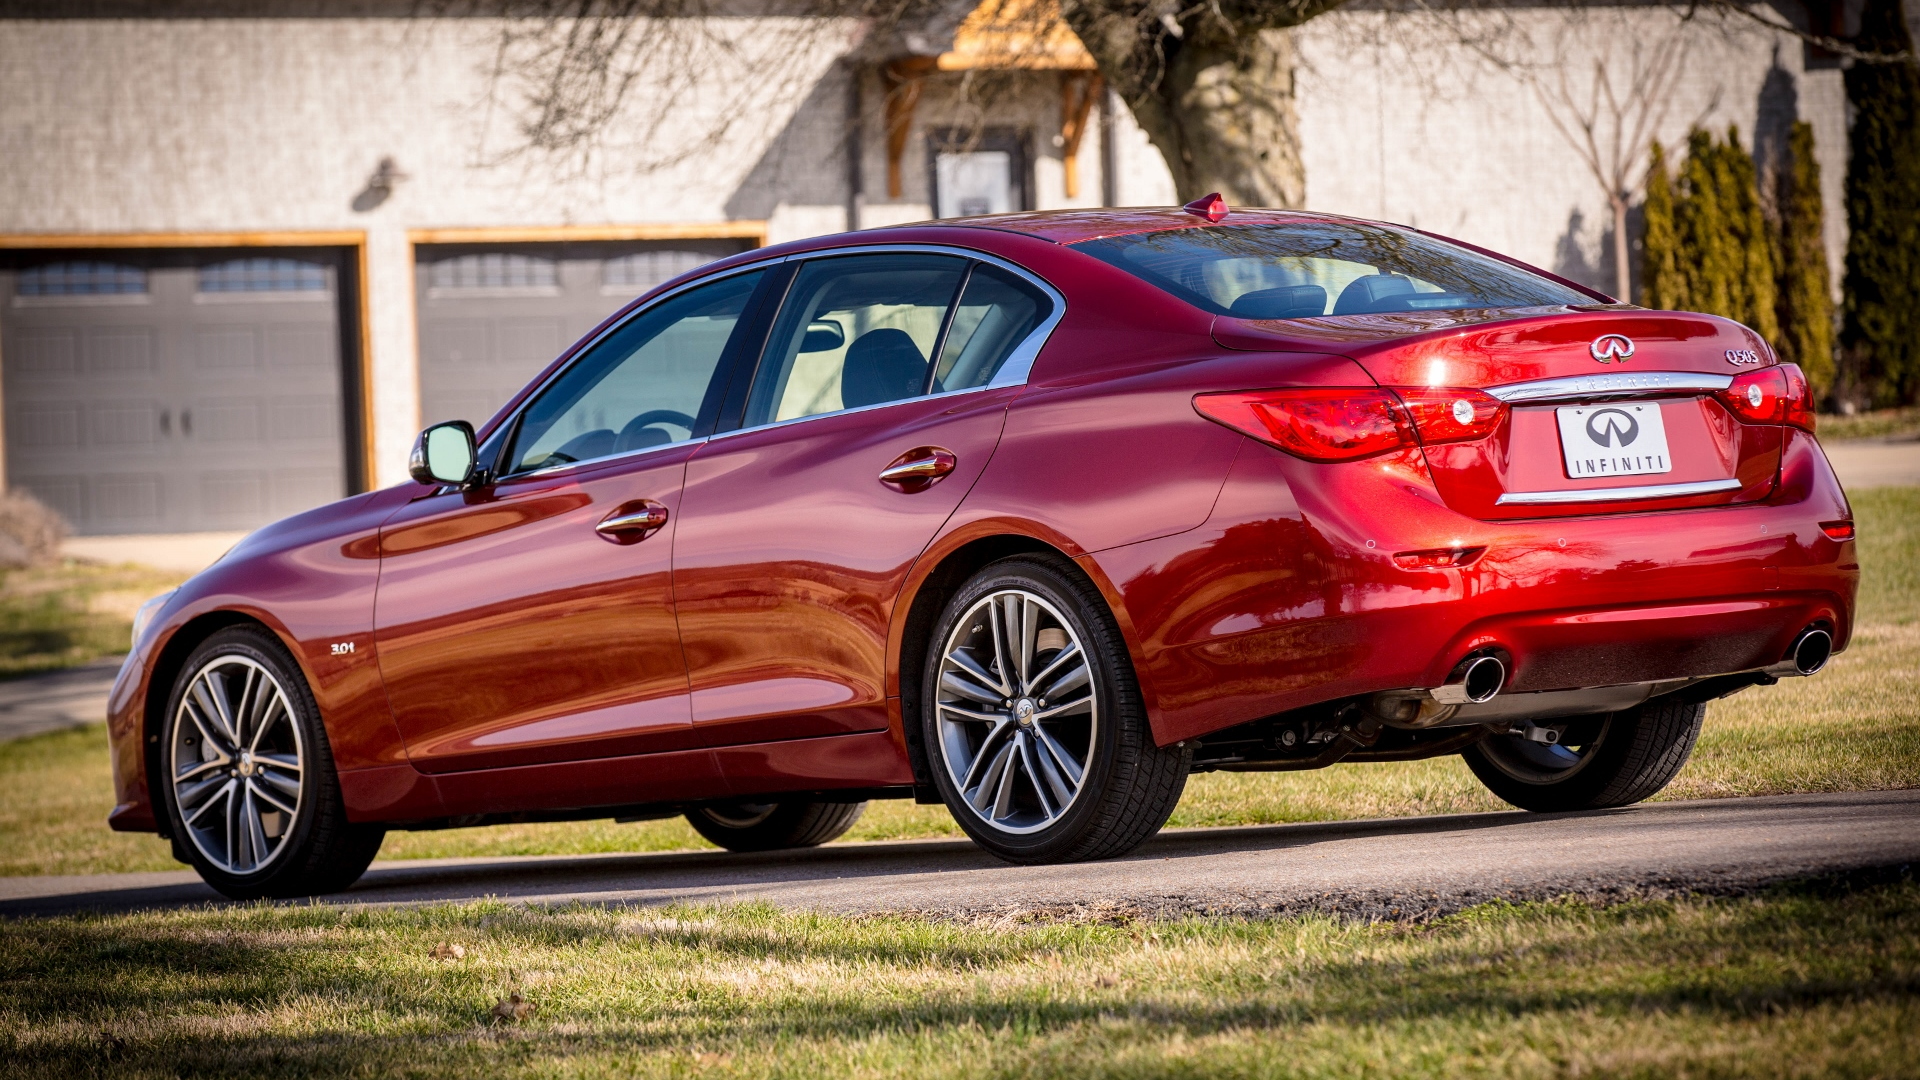 2016 Infiniti Q50 Red Sport 400 first drive review